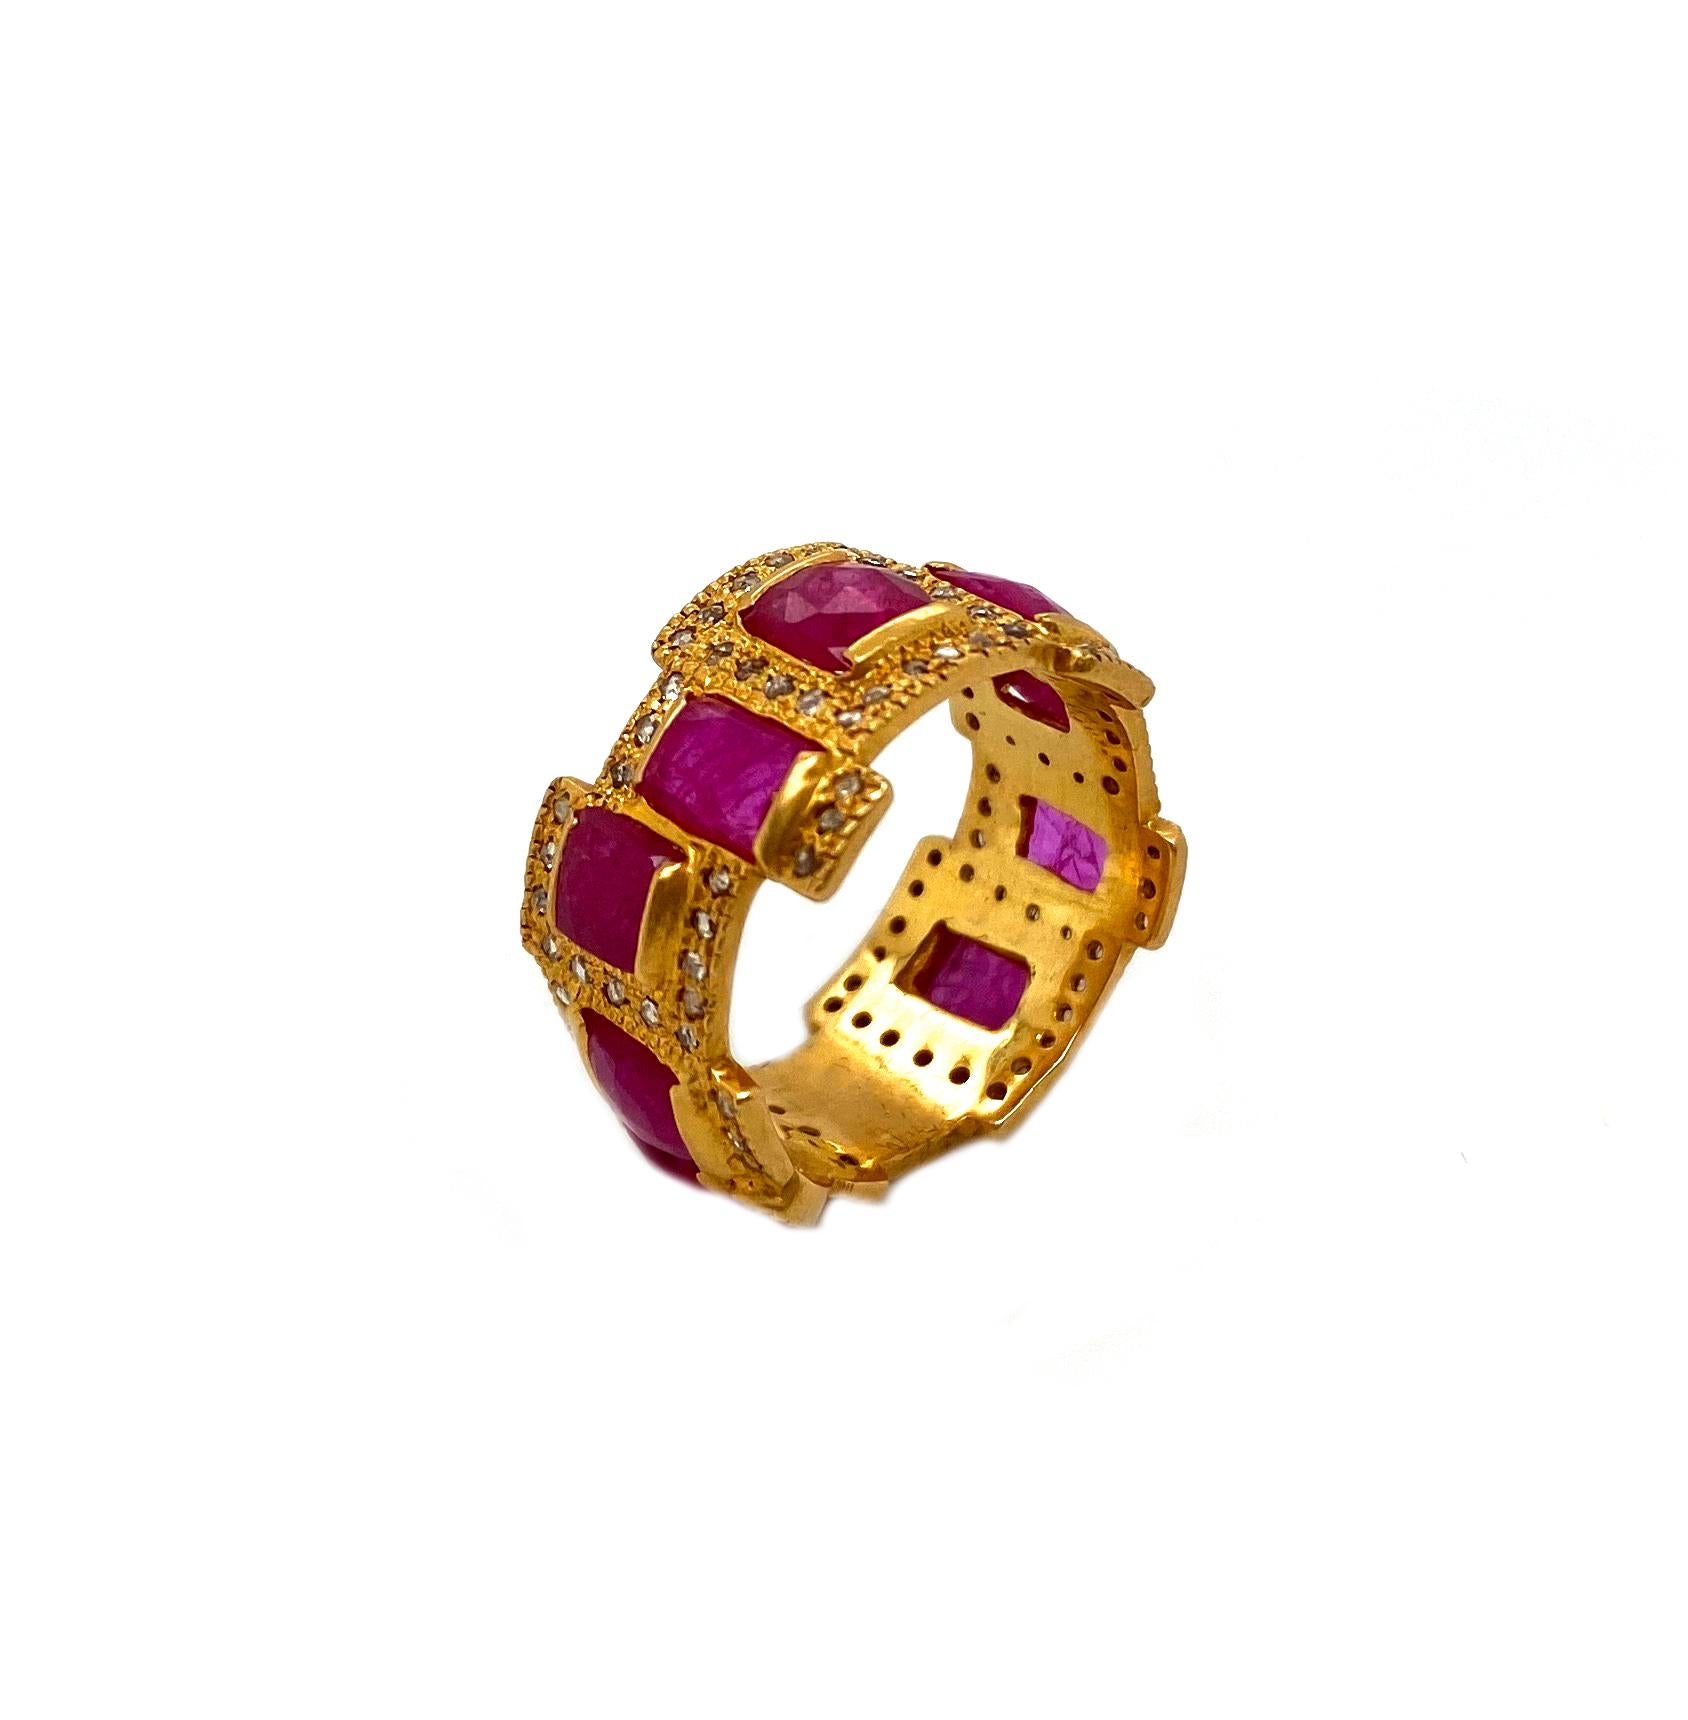 The simple yet bold statement piece. Of the beautifully designed band ring set in a rich 20 karat yellow gold. And 4.30cts Ruby and diamonds surround it at 0.62cts, brought to you by one of Coomi's impeccable collection, Luminosity, which consists